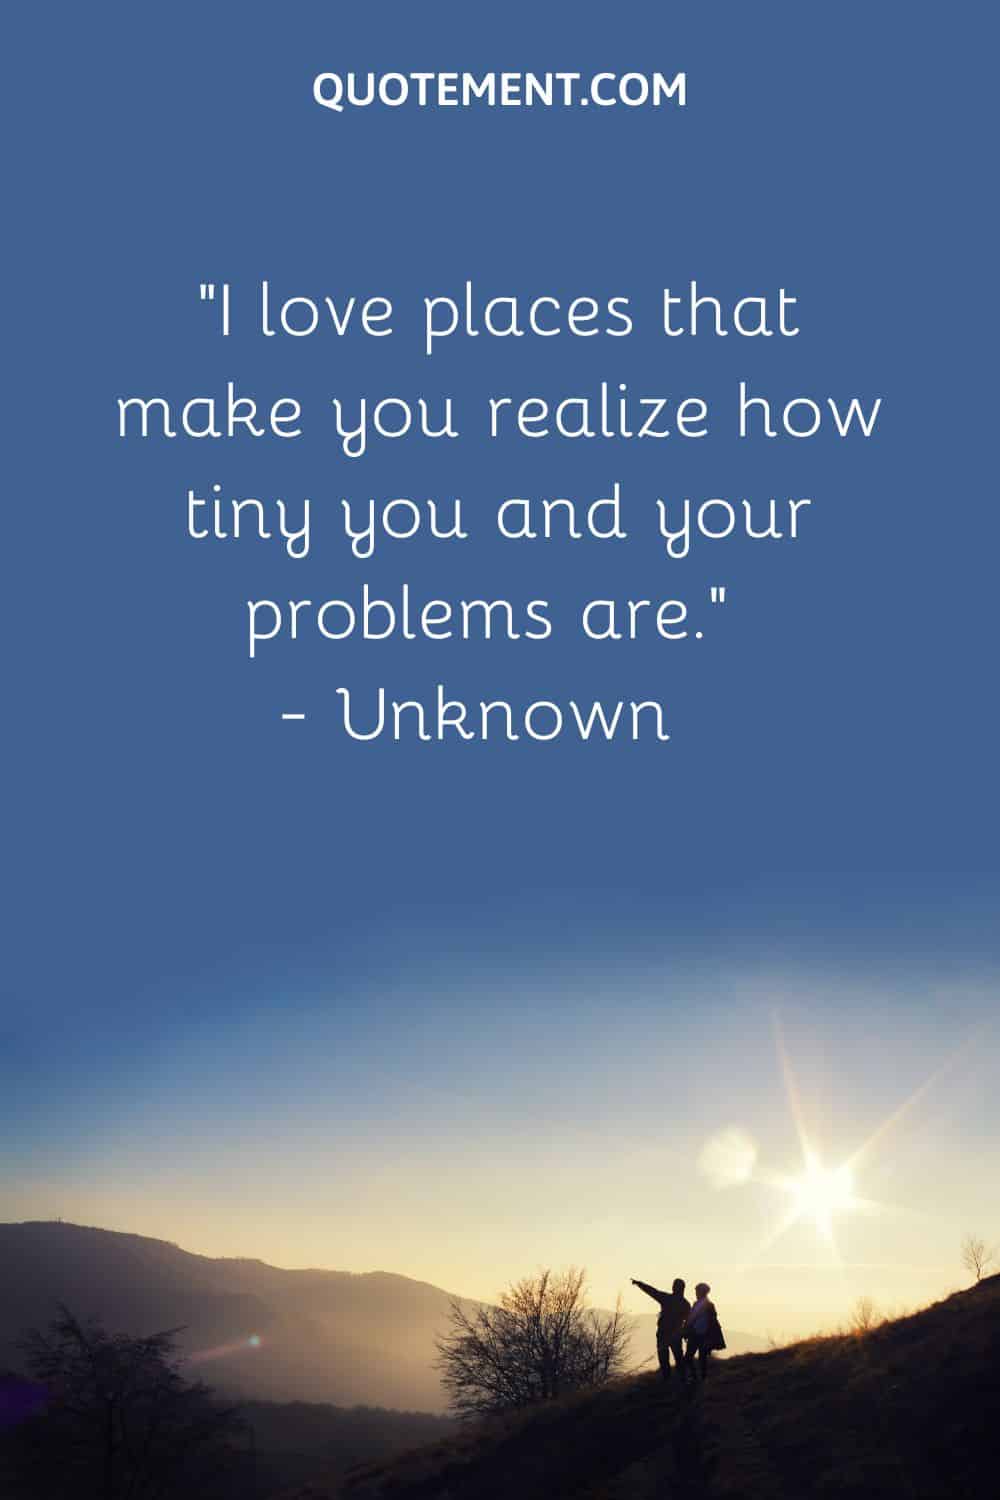 “I love places that make you realize how tiny you and your problems are.” — Unknown